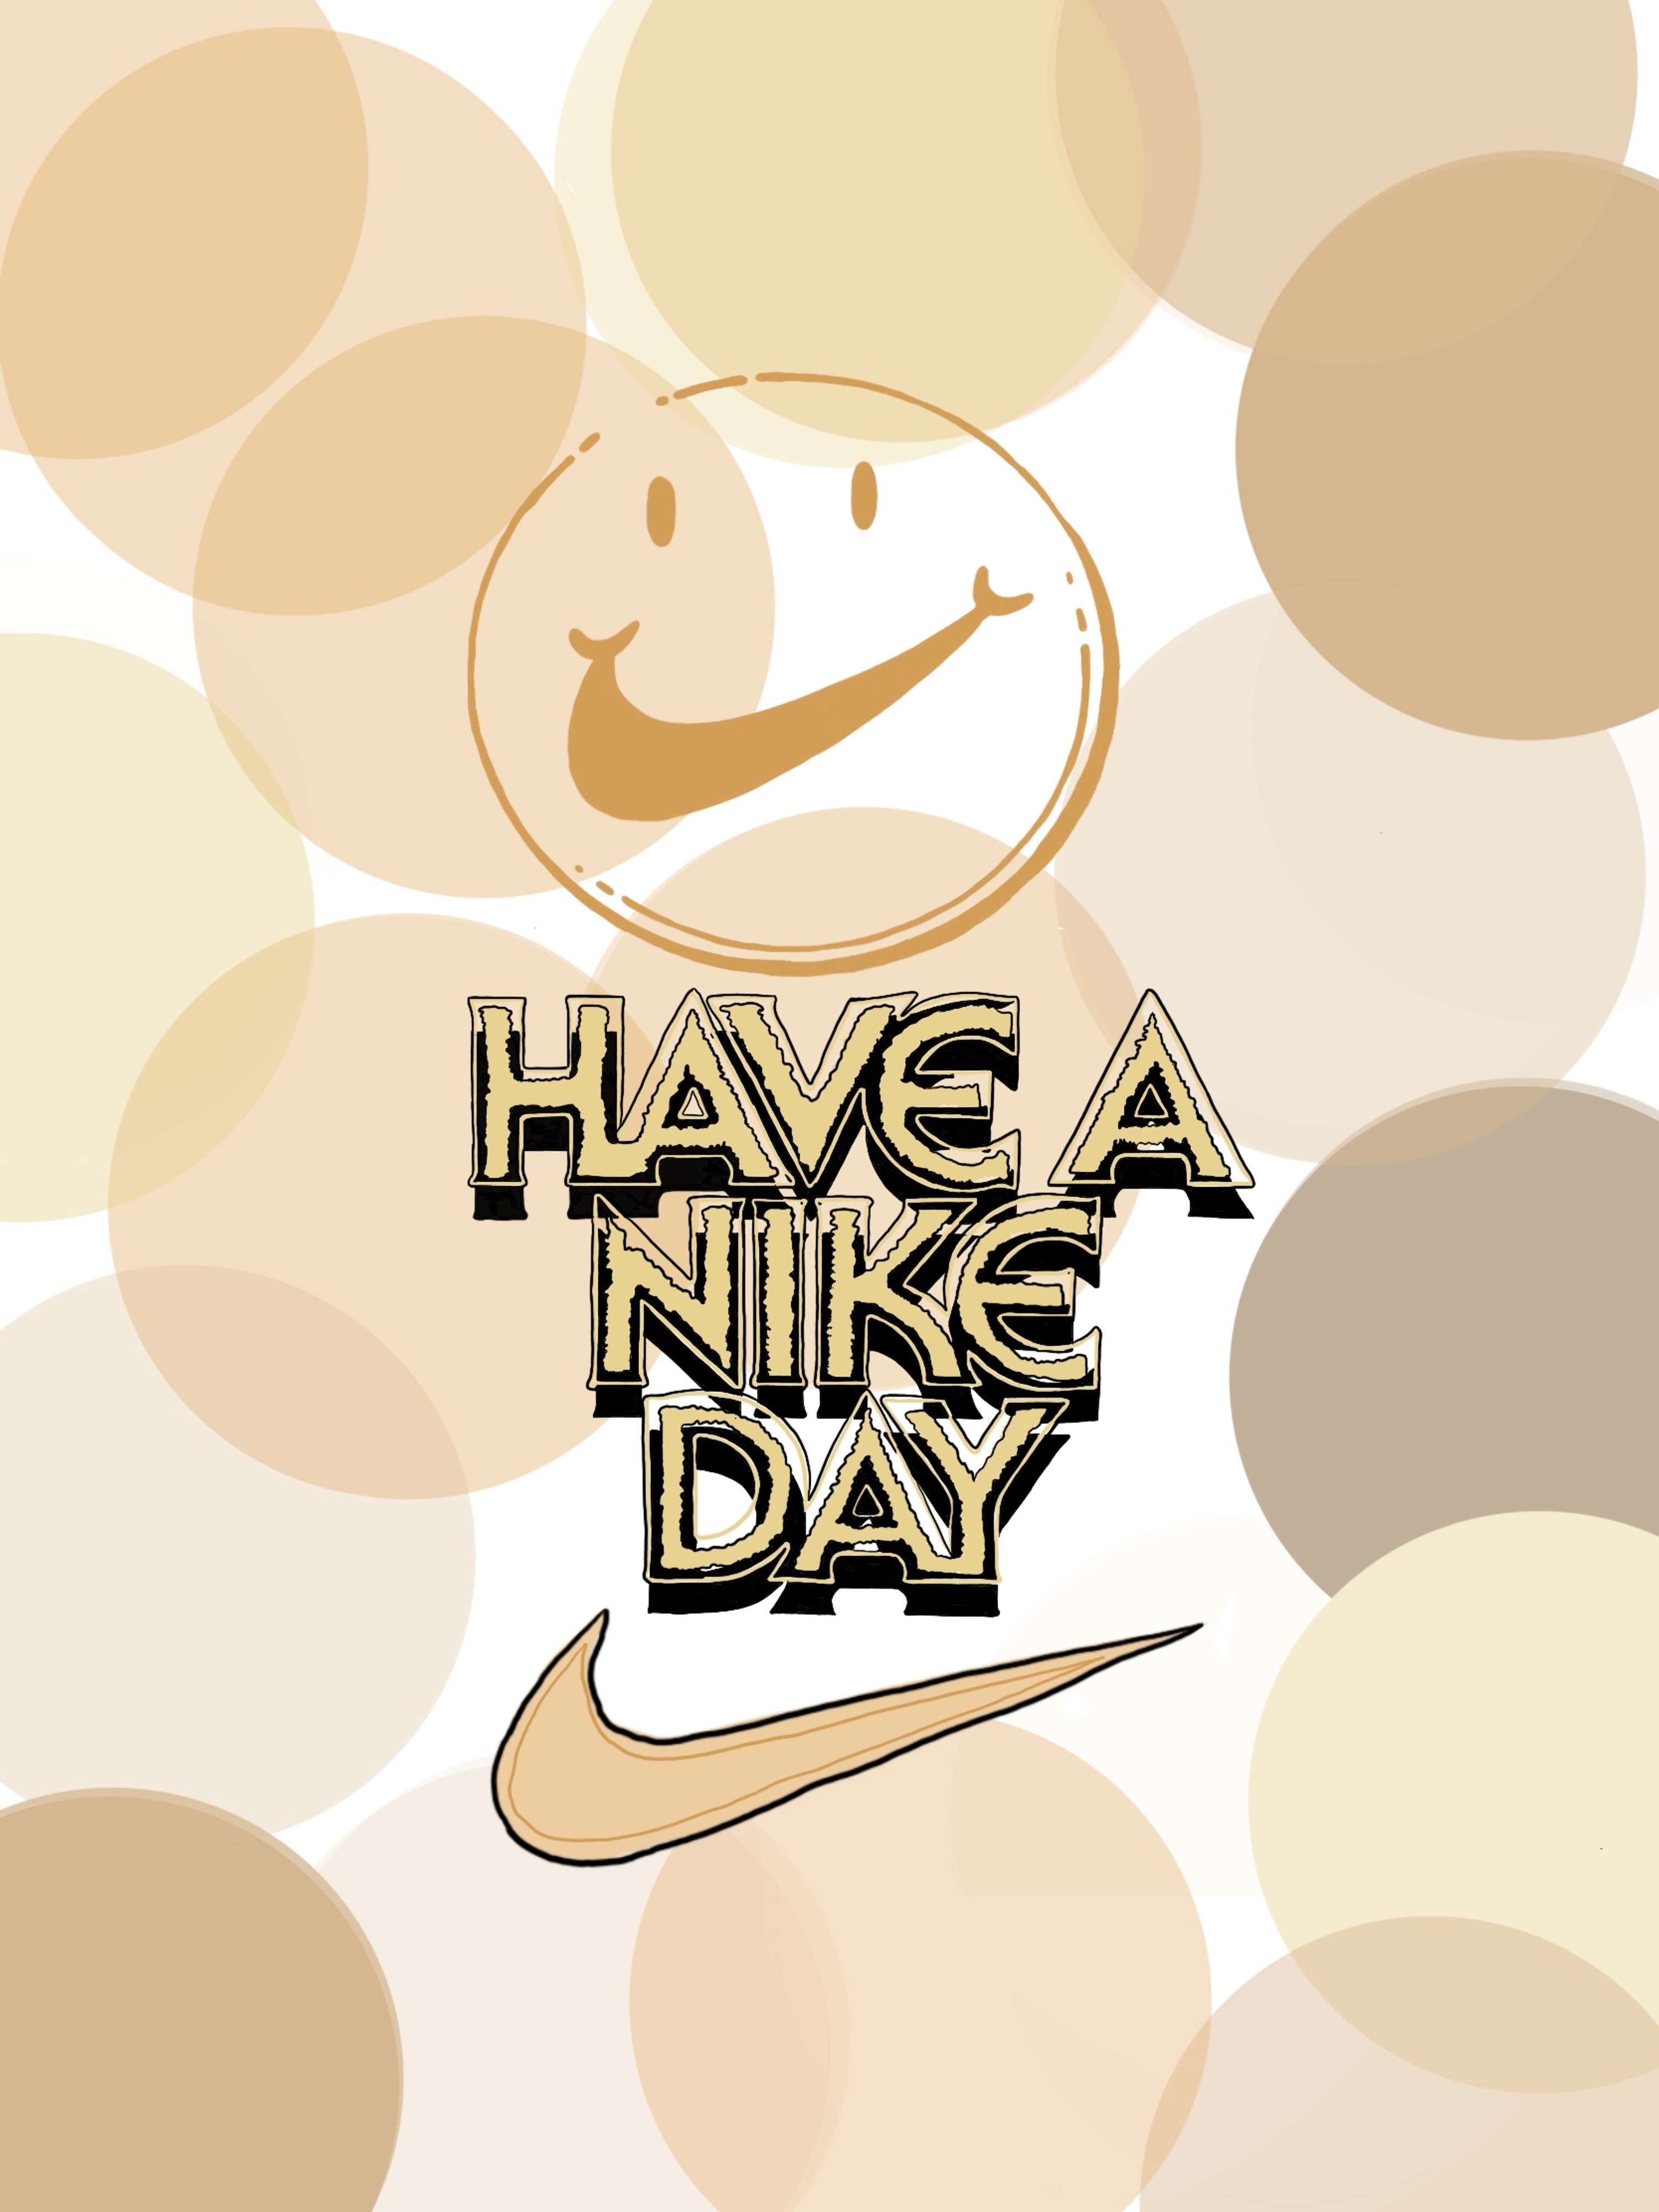 Nike 'Have a Day' Poster Concepts | The Dots